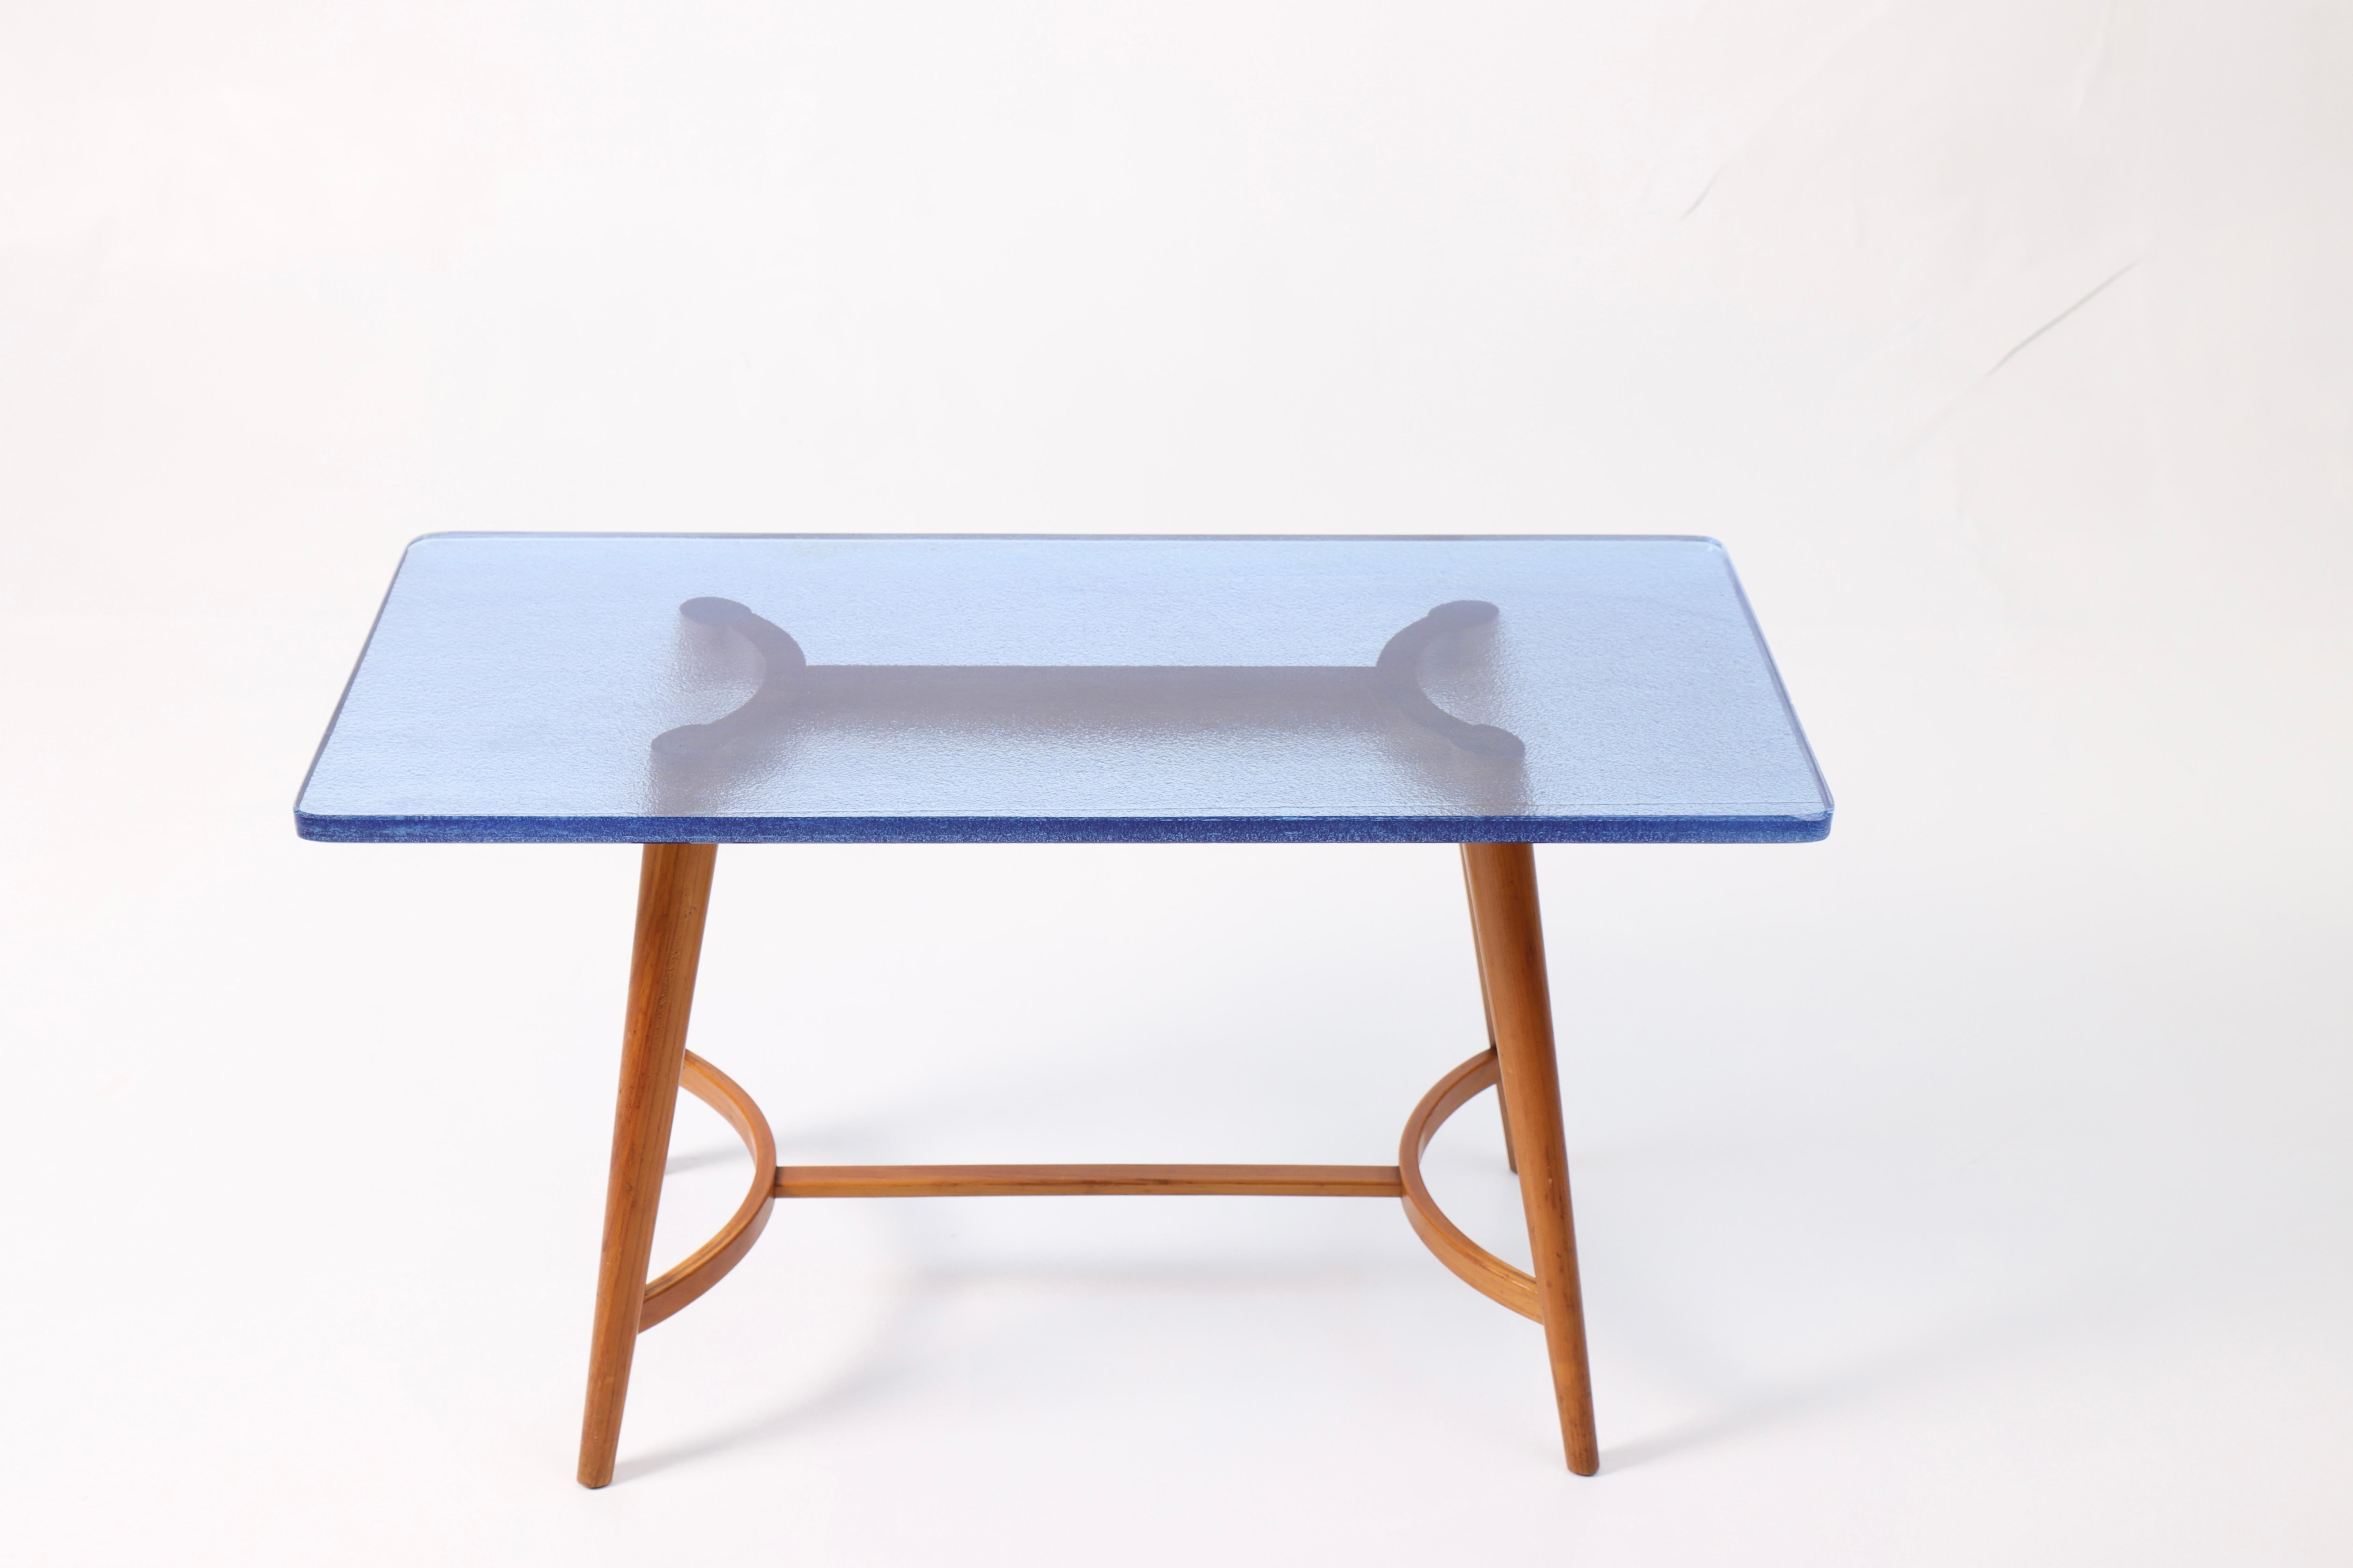 Scandinavian Modern Midcentury Low Table in Glass and Elm, Made in Denmark, 1950s For Sale